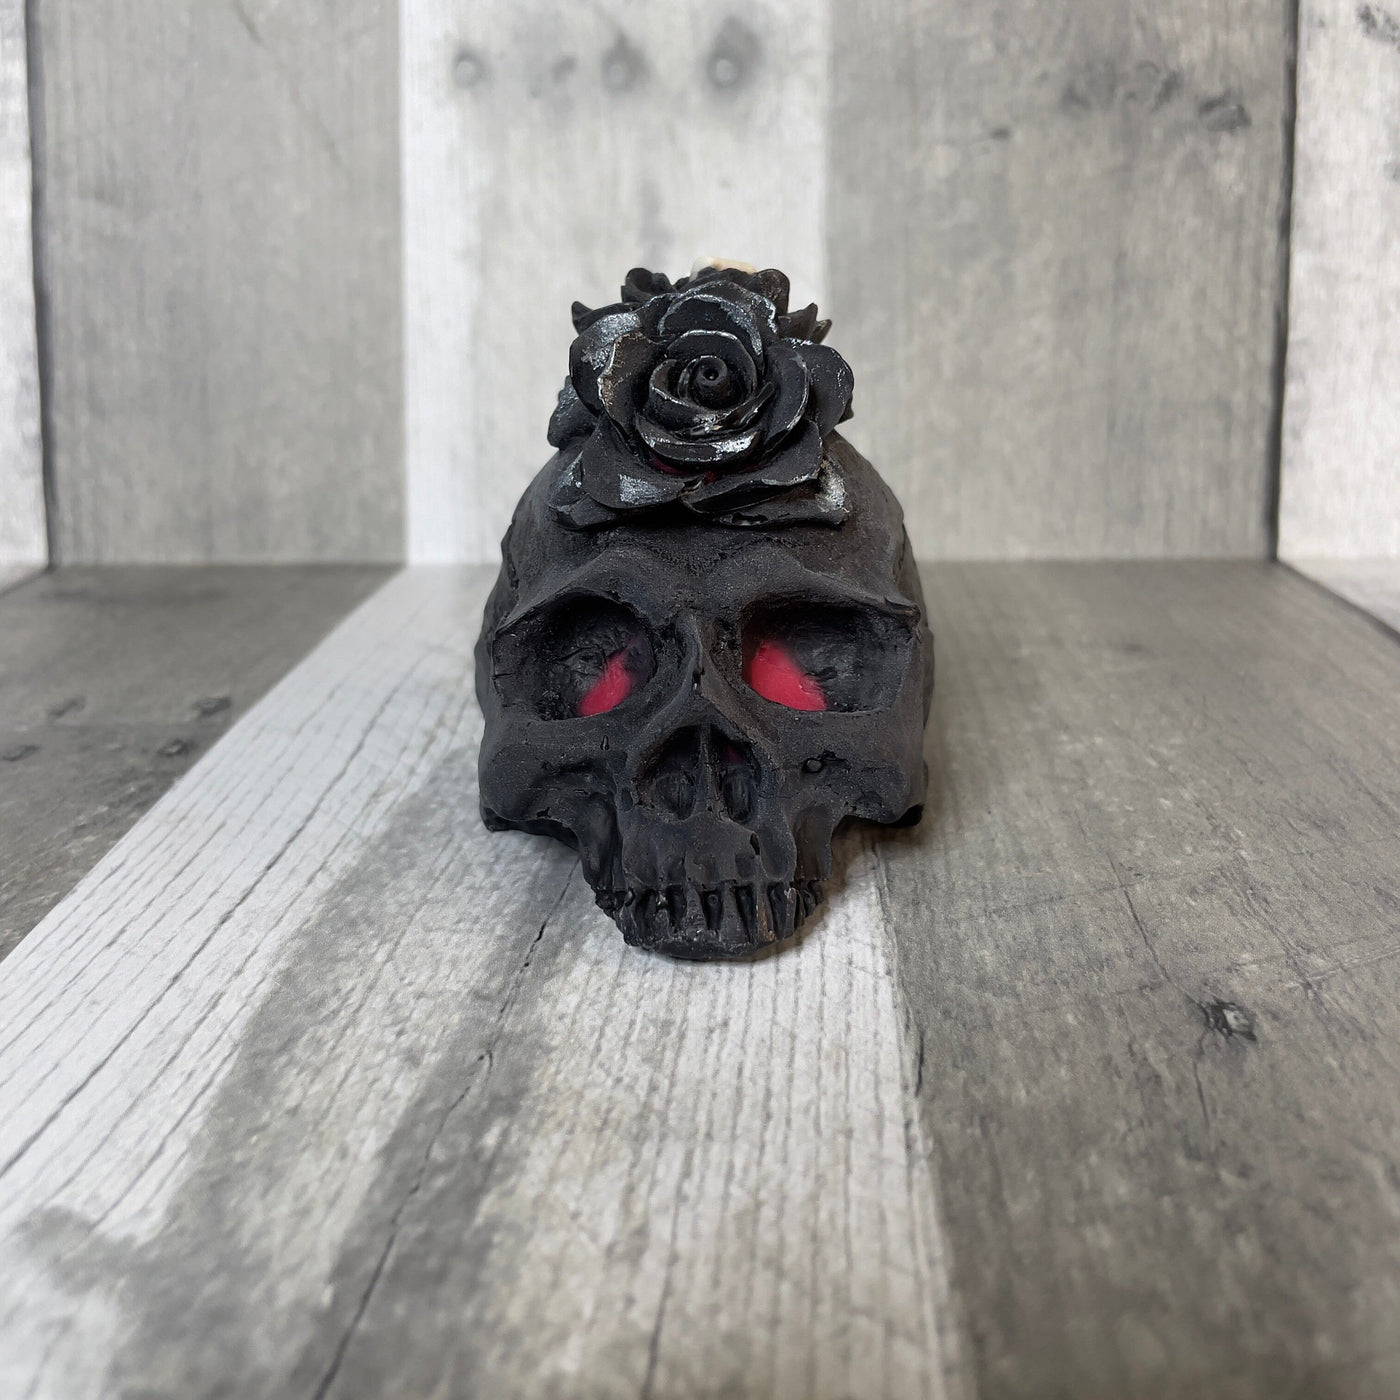 Bleeding Skull Candle candle The Teal Bandit 